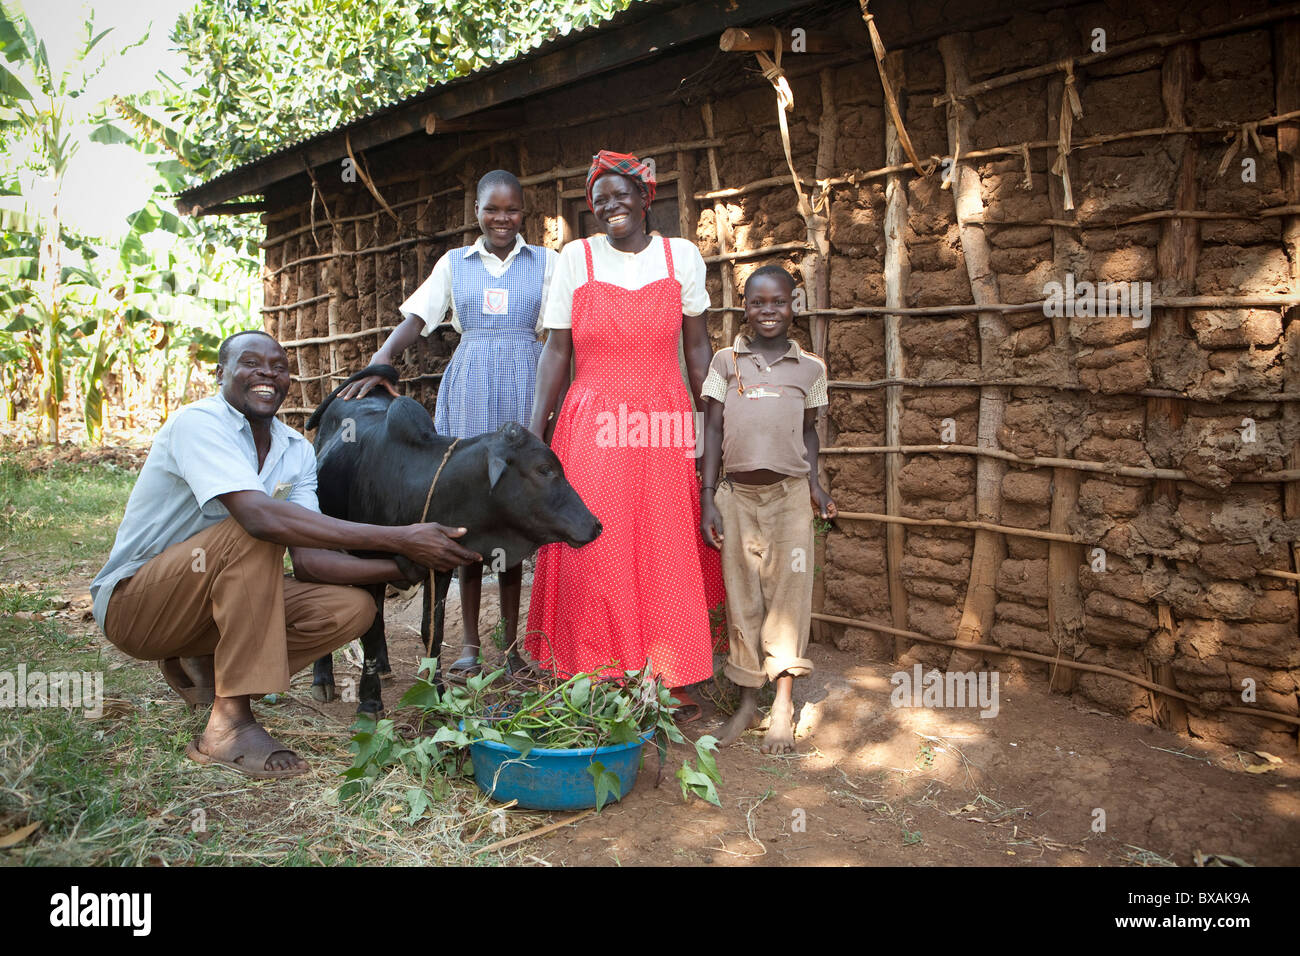 A Ugandan family stands outside their home with their cow in Buwanyanga Village - Sironko, Eastern Uganda, East Africa. Stock Photo